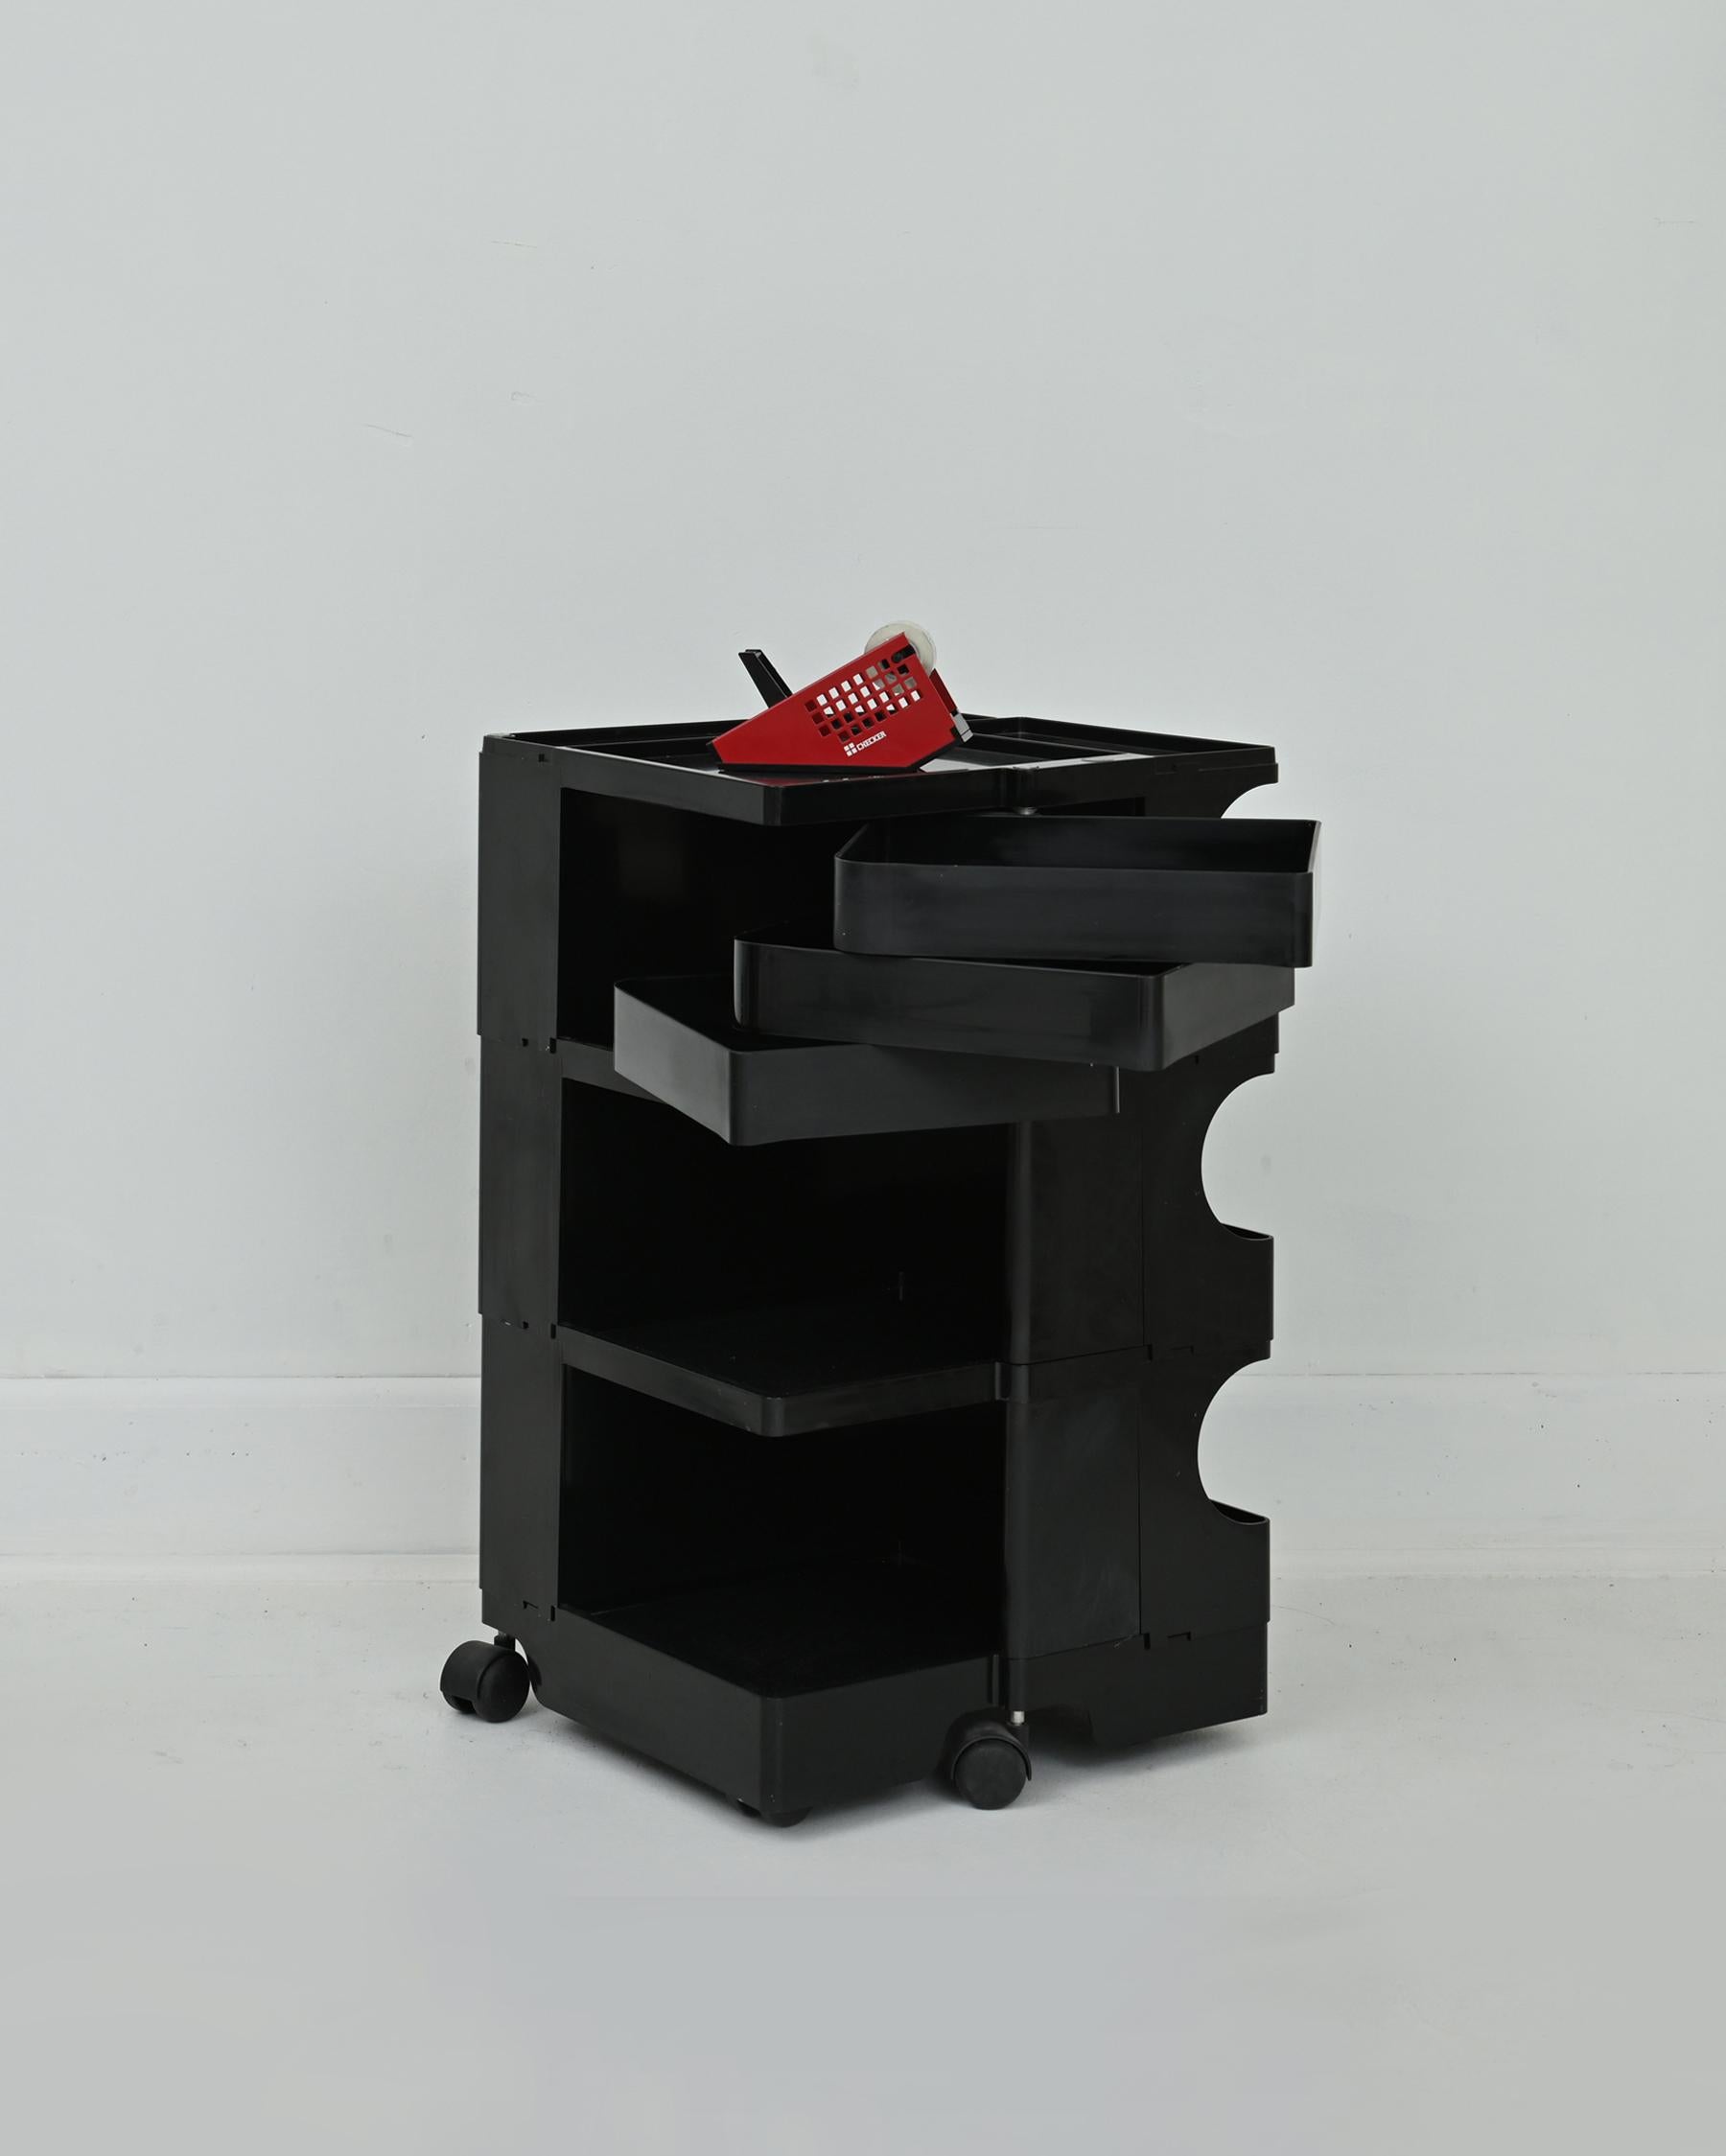 1970s black plastic Boby Trolly cart by Joe Colombo for Bieffeplast with 6 storage drawers. Made in Italy. Some small scuffs and dulling of the plastic. Signs of wear are consistent with age and use. Labeled and signed. The Boby Trolley is exhibited